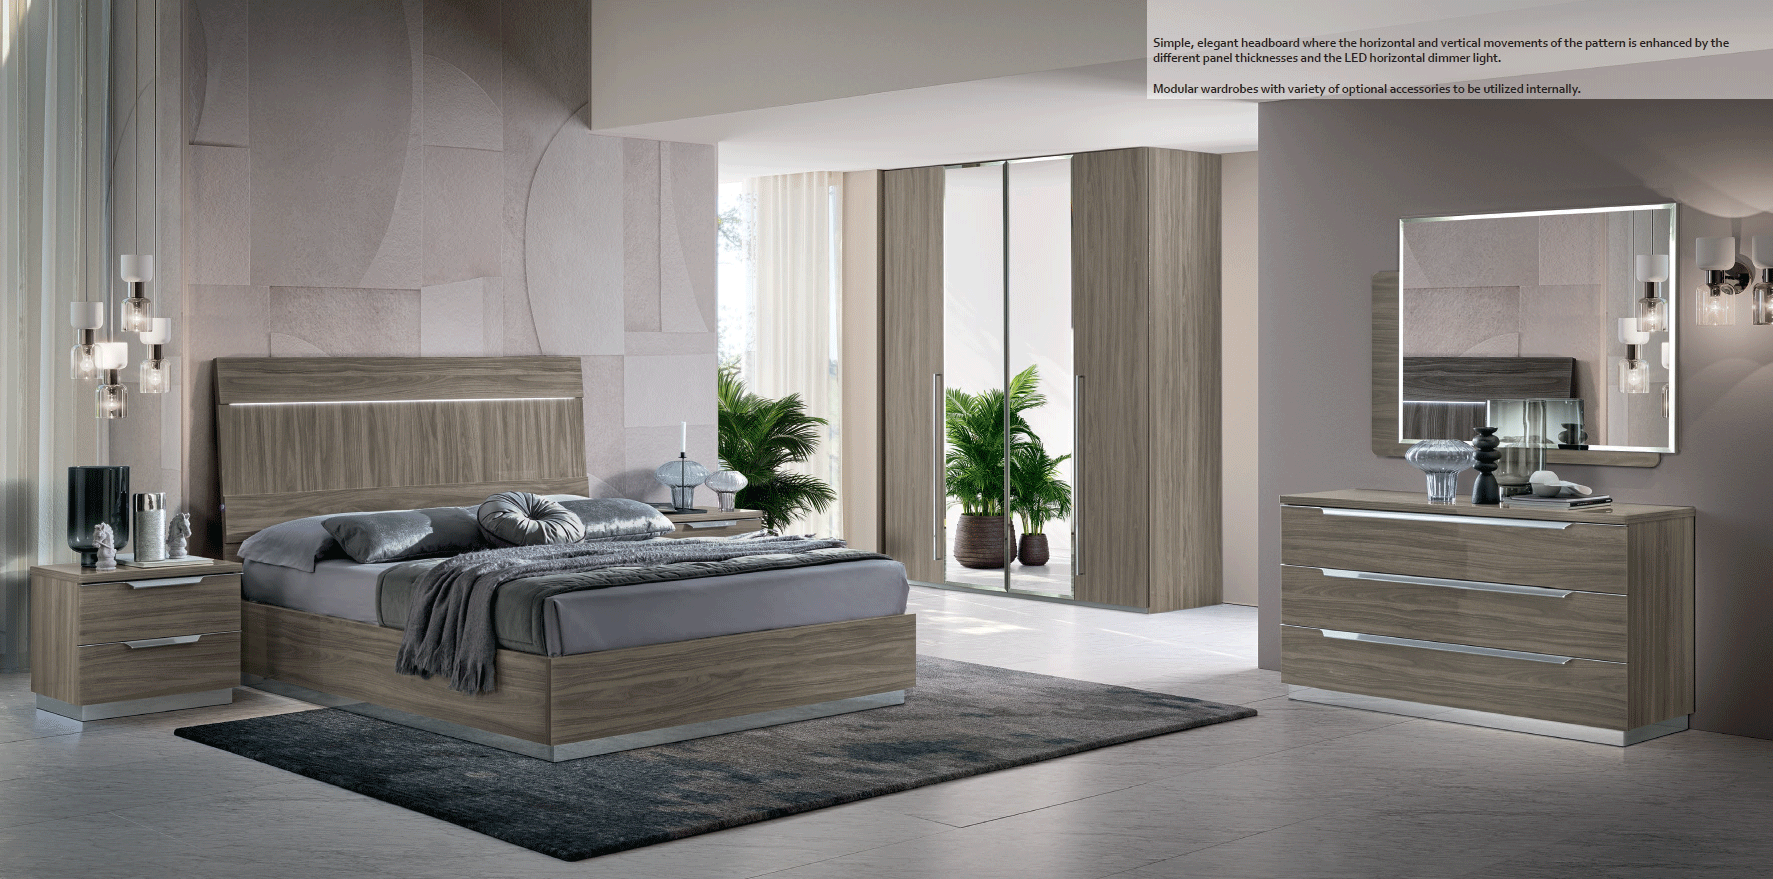 Brands Camel Gold Collection, Italy Kroma Bedroom GREY Additional Items